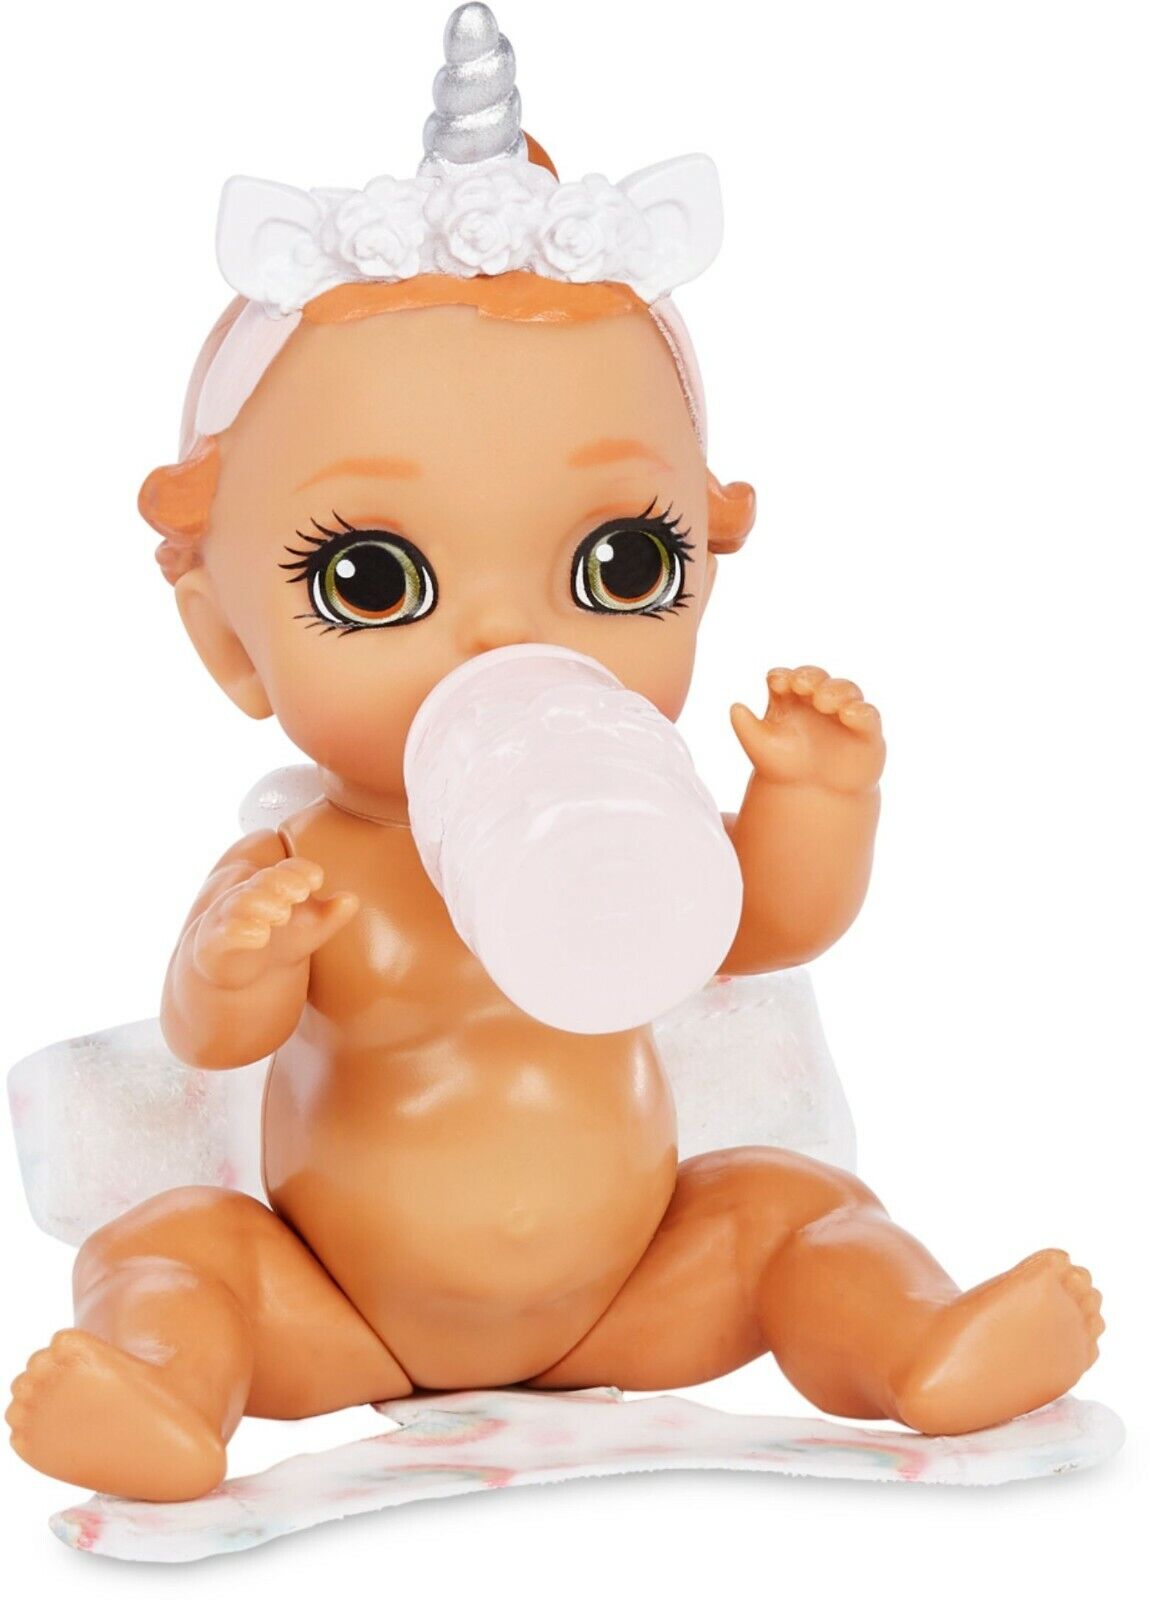 Baby Born Surprise Series 3 Blooming Babies Mystery Pack NEW. MGA Entertainment 917271 - фотография #10